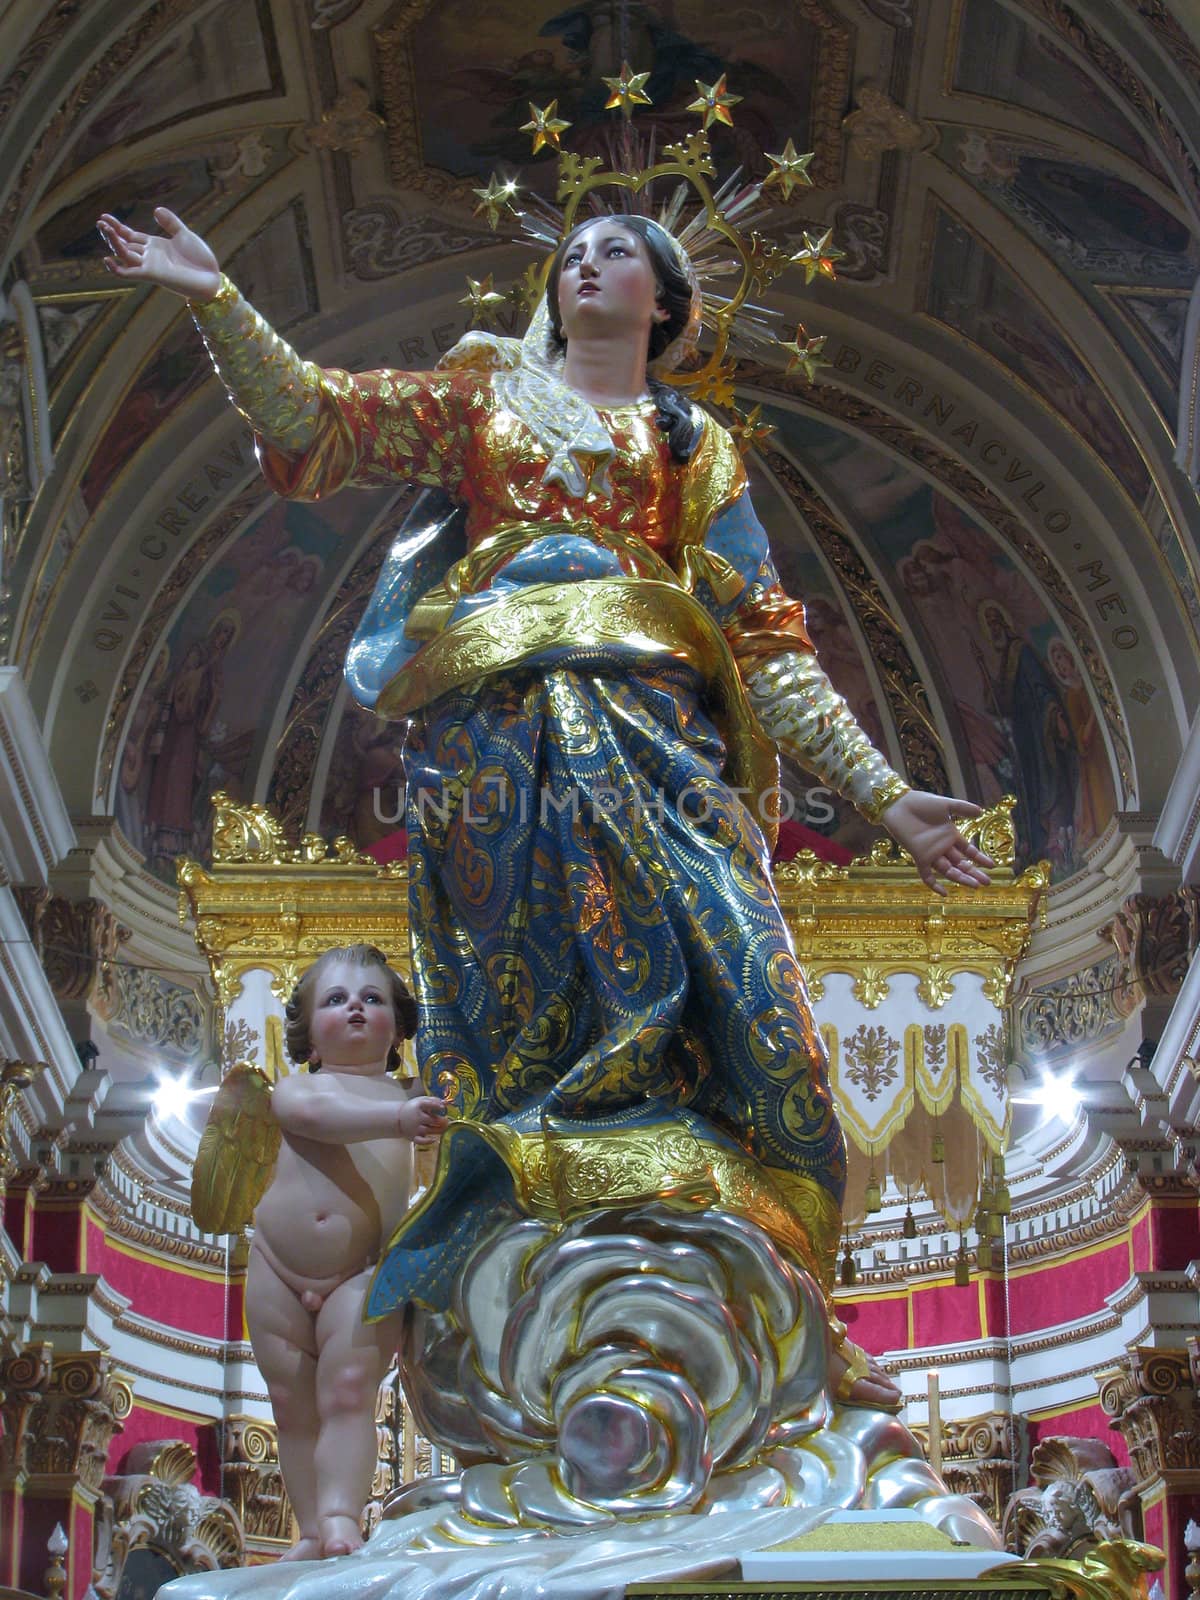 A detail of the statue of The Assumption of the Blessed Virgin Mary, at Ghaxaq, Malta.